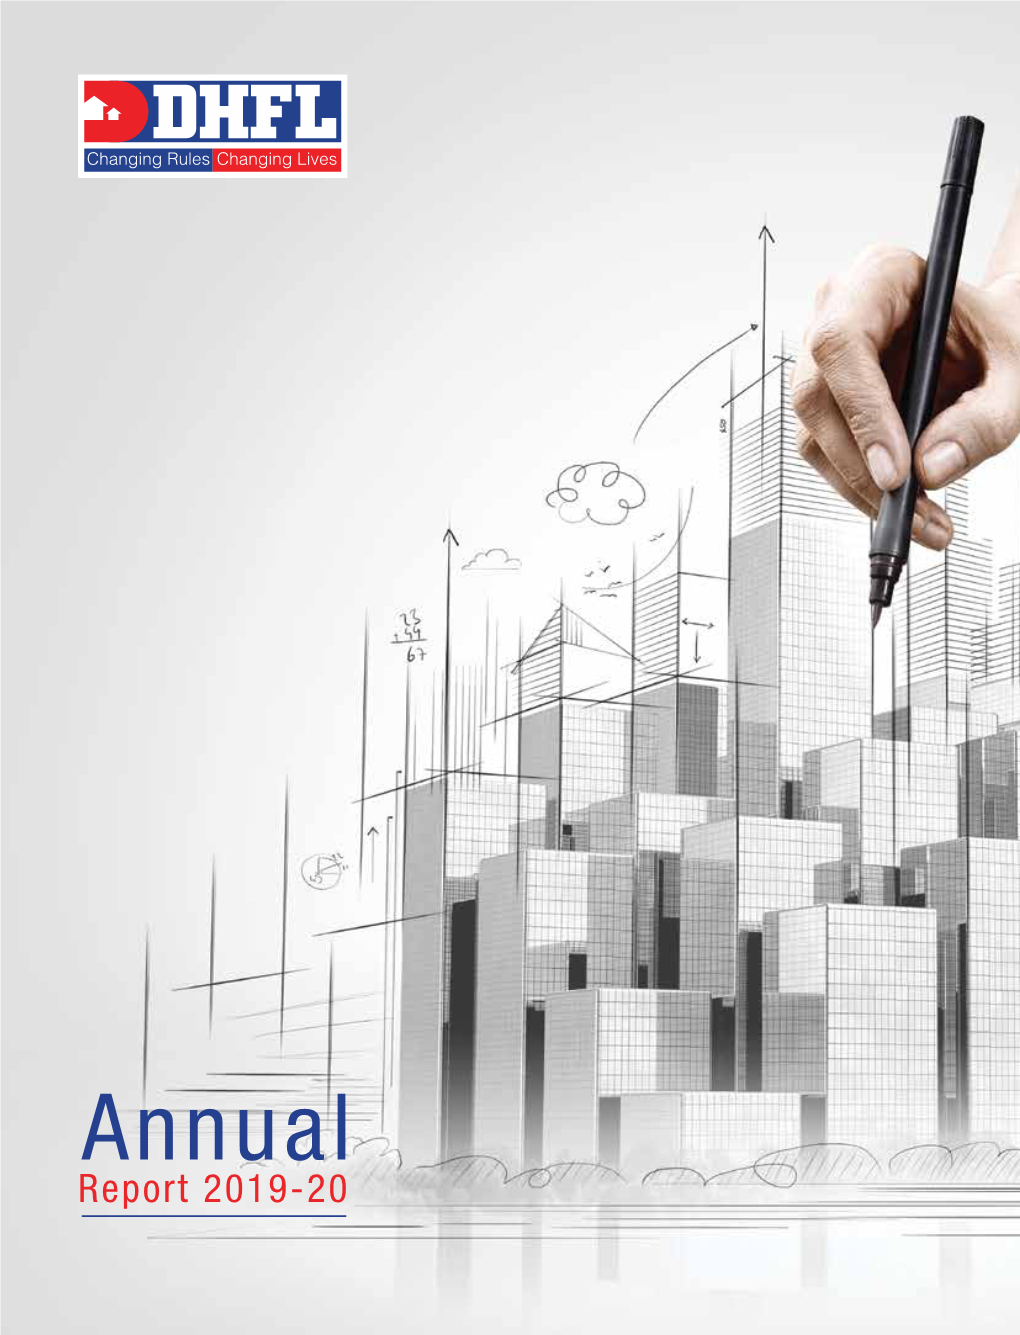 Annual Report for the FY 2019-20